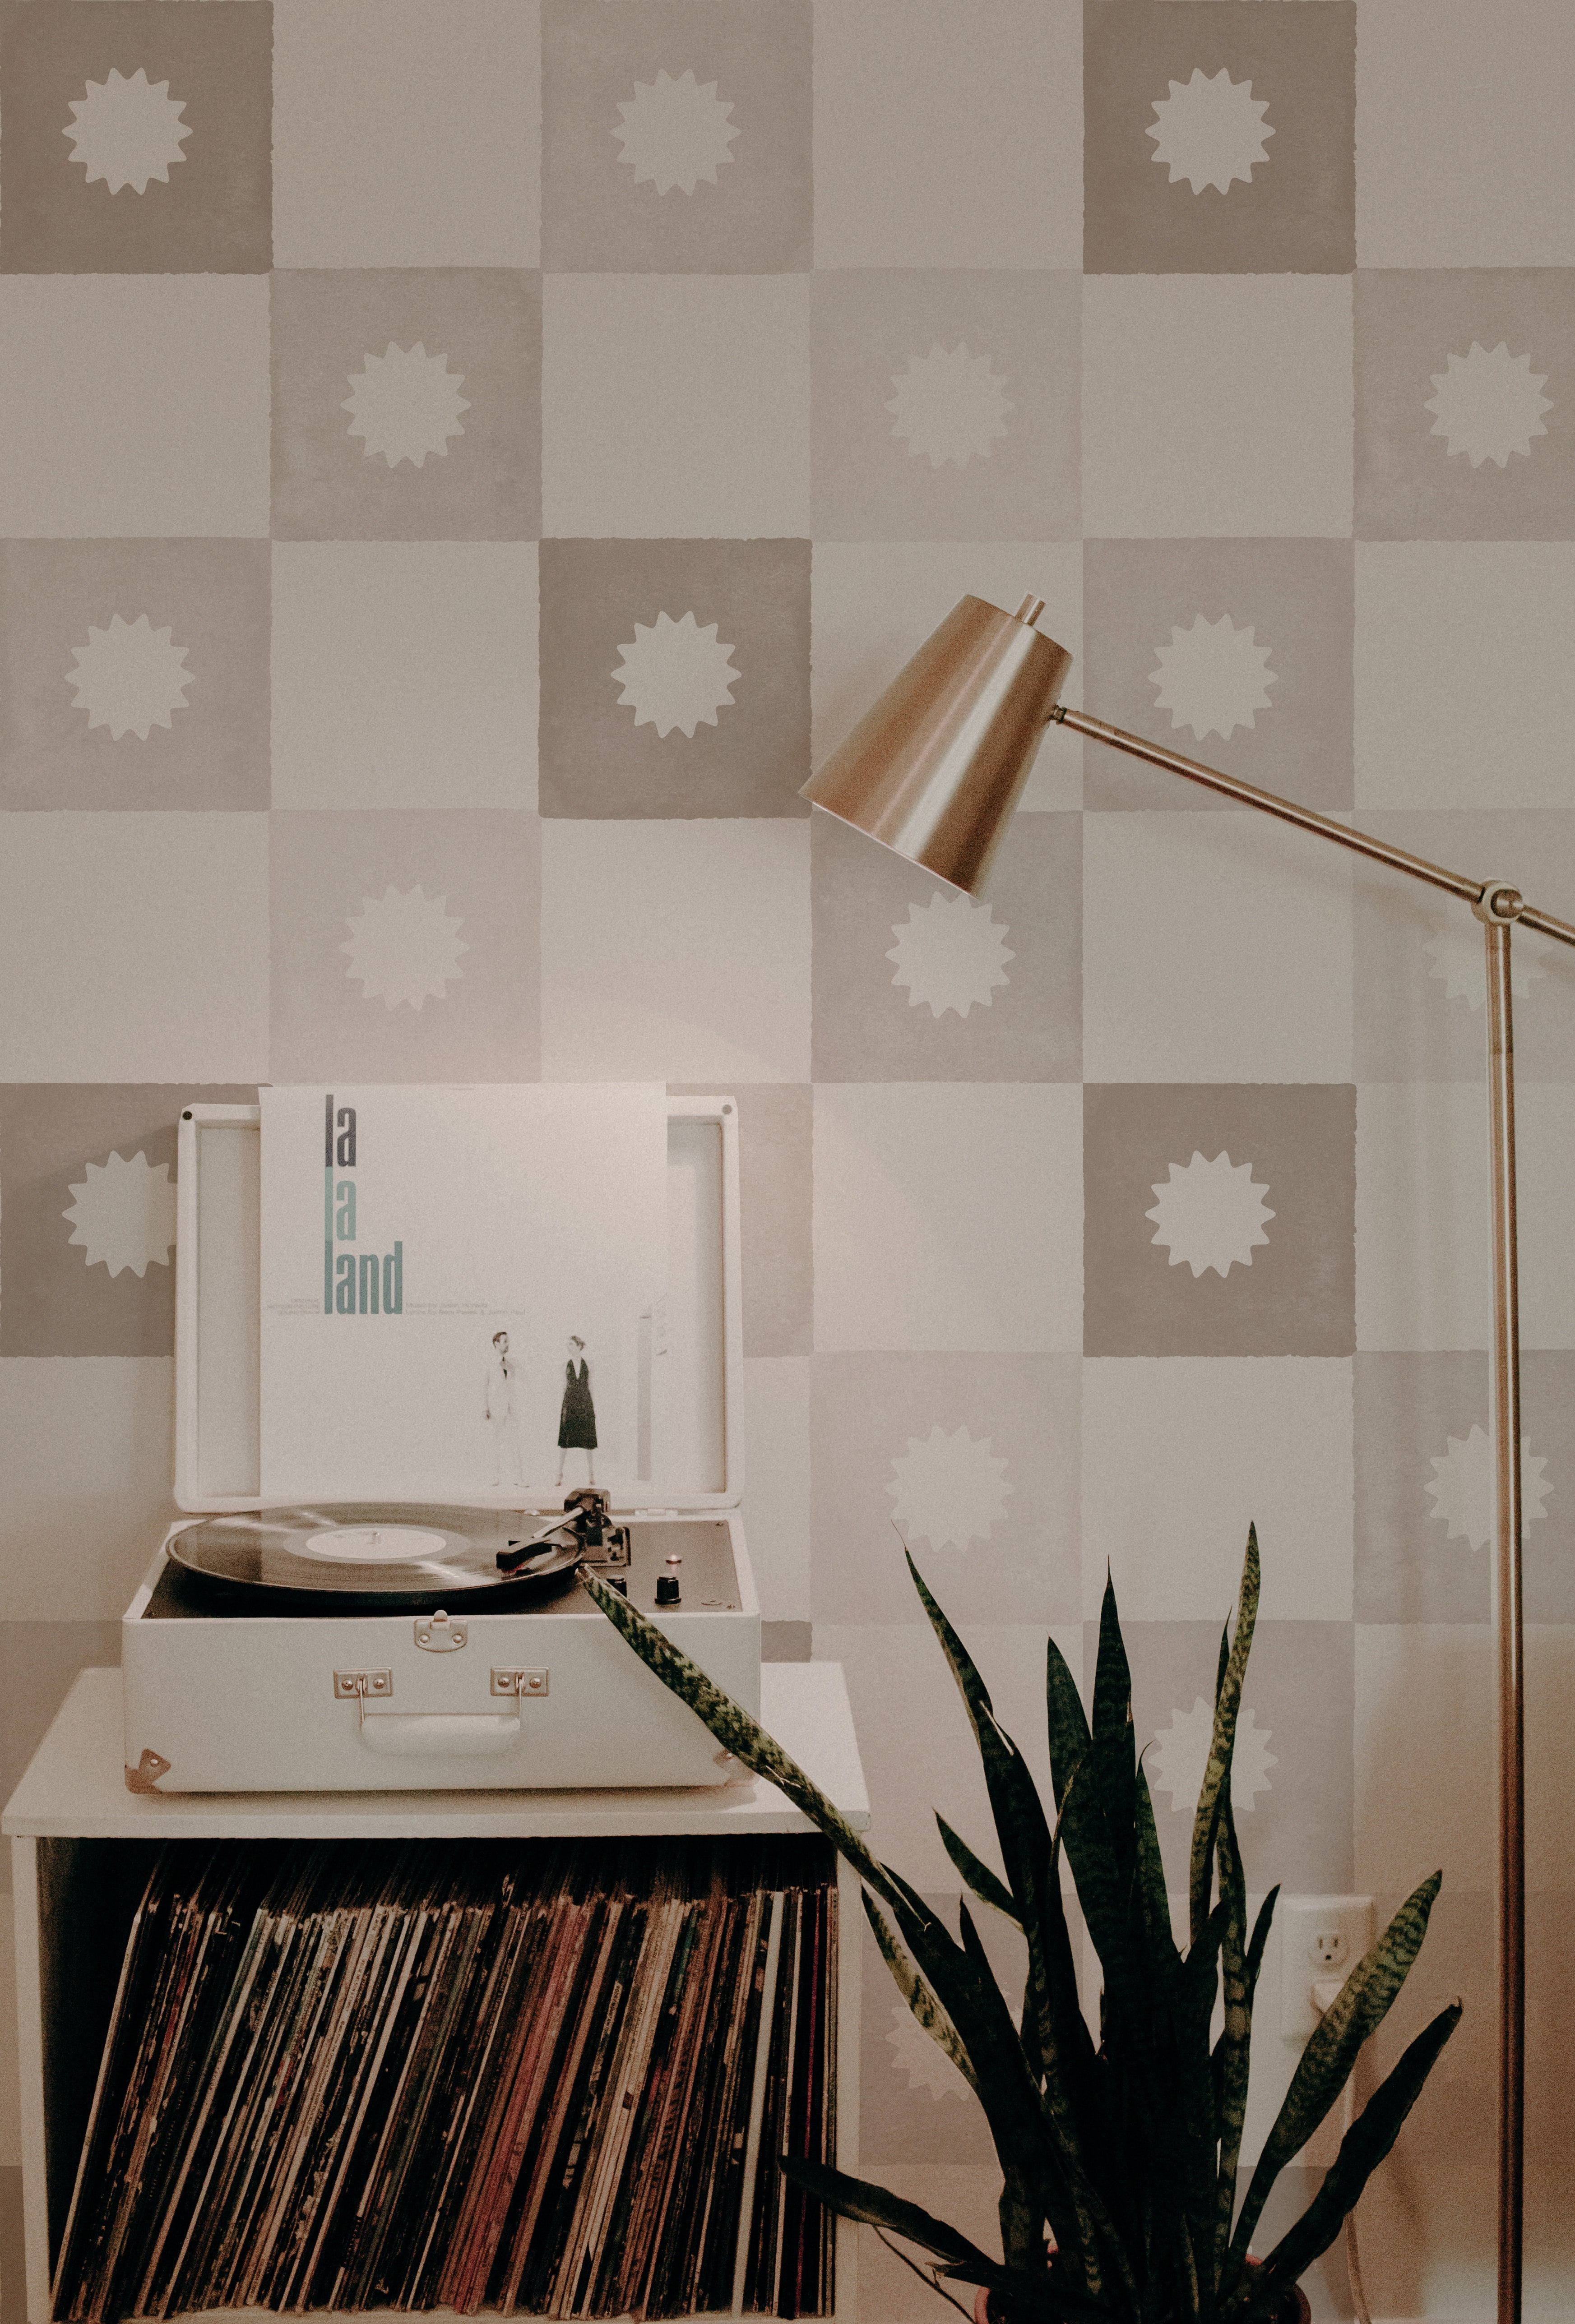 A cozy corner featuring a record player setup against a beige and white checkered wallpaper. The pattern includes a unique white floral emblem in each beige square. A sleek floor lamp, a snake plant, and a collection of vinyl records complete the retro-modern vibe.